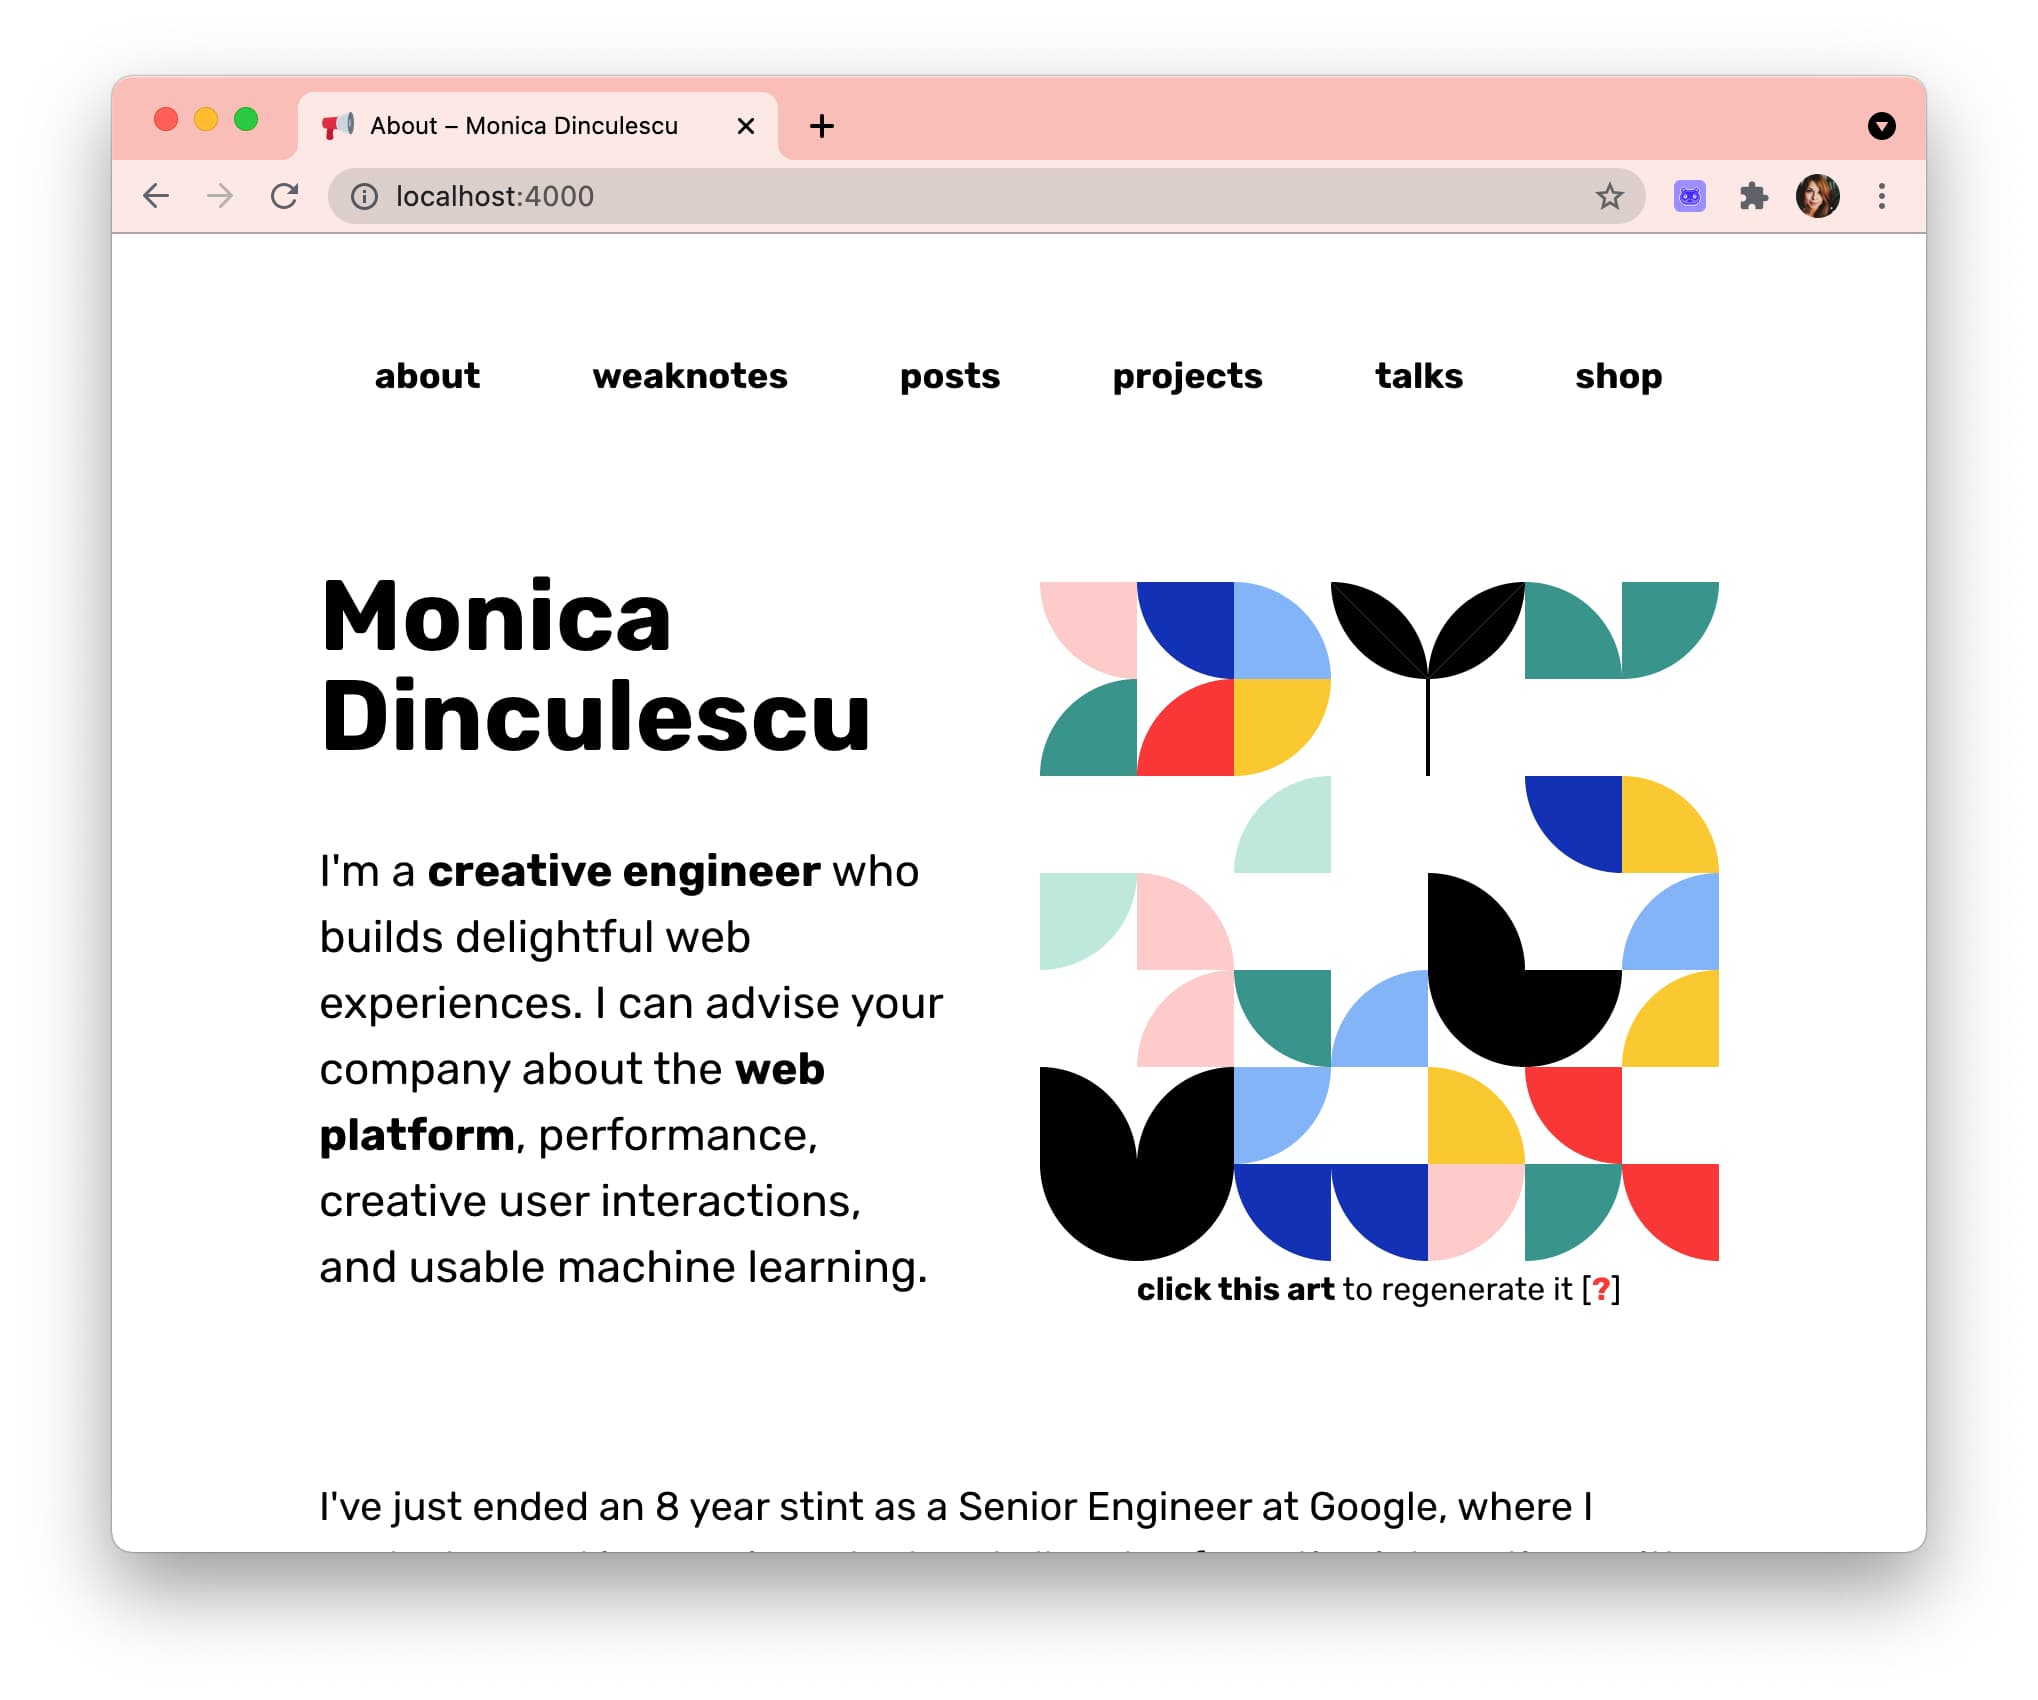 my new website. the structure of the site is the same, but below the nav bar there are
  now 2 columns: the left one has a small blurb about me, the right one has a grid of colourful cells.